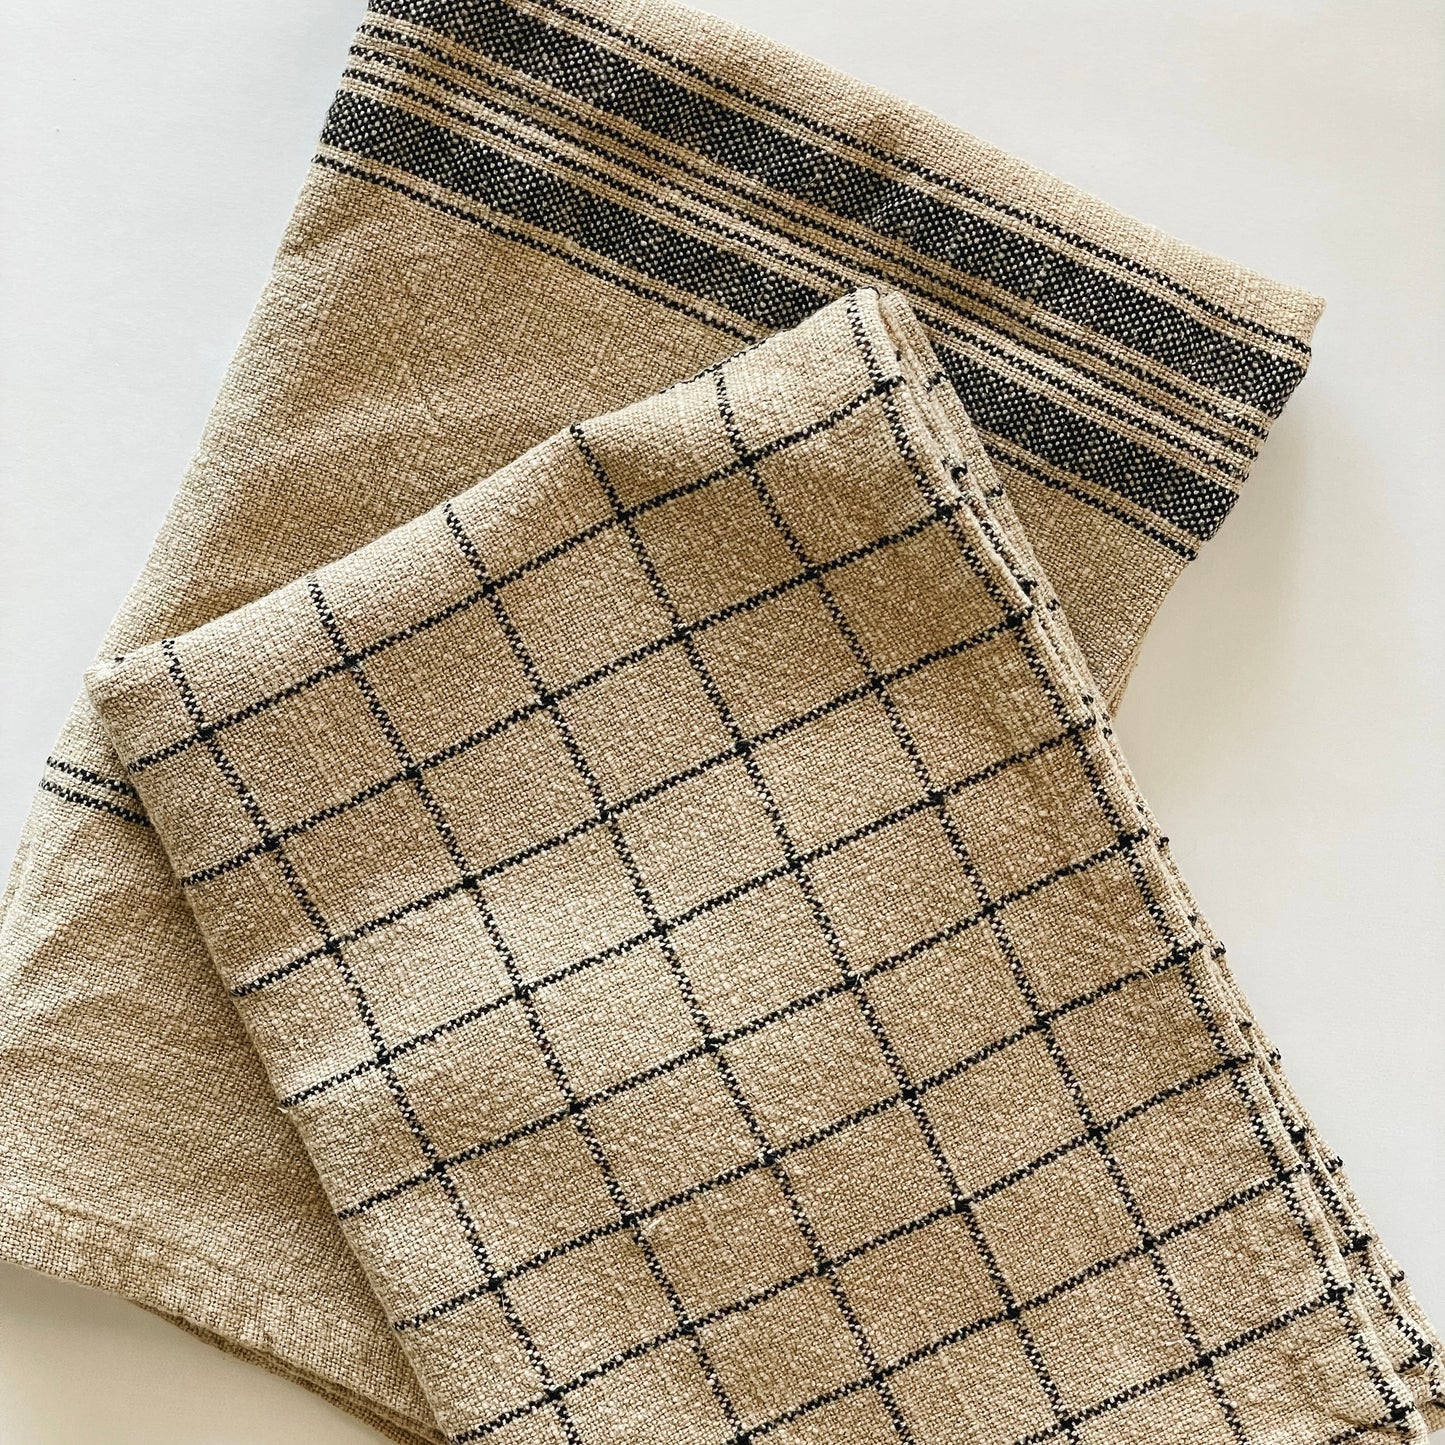 Stanley Striped Dish Towel